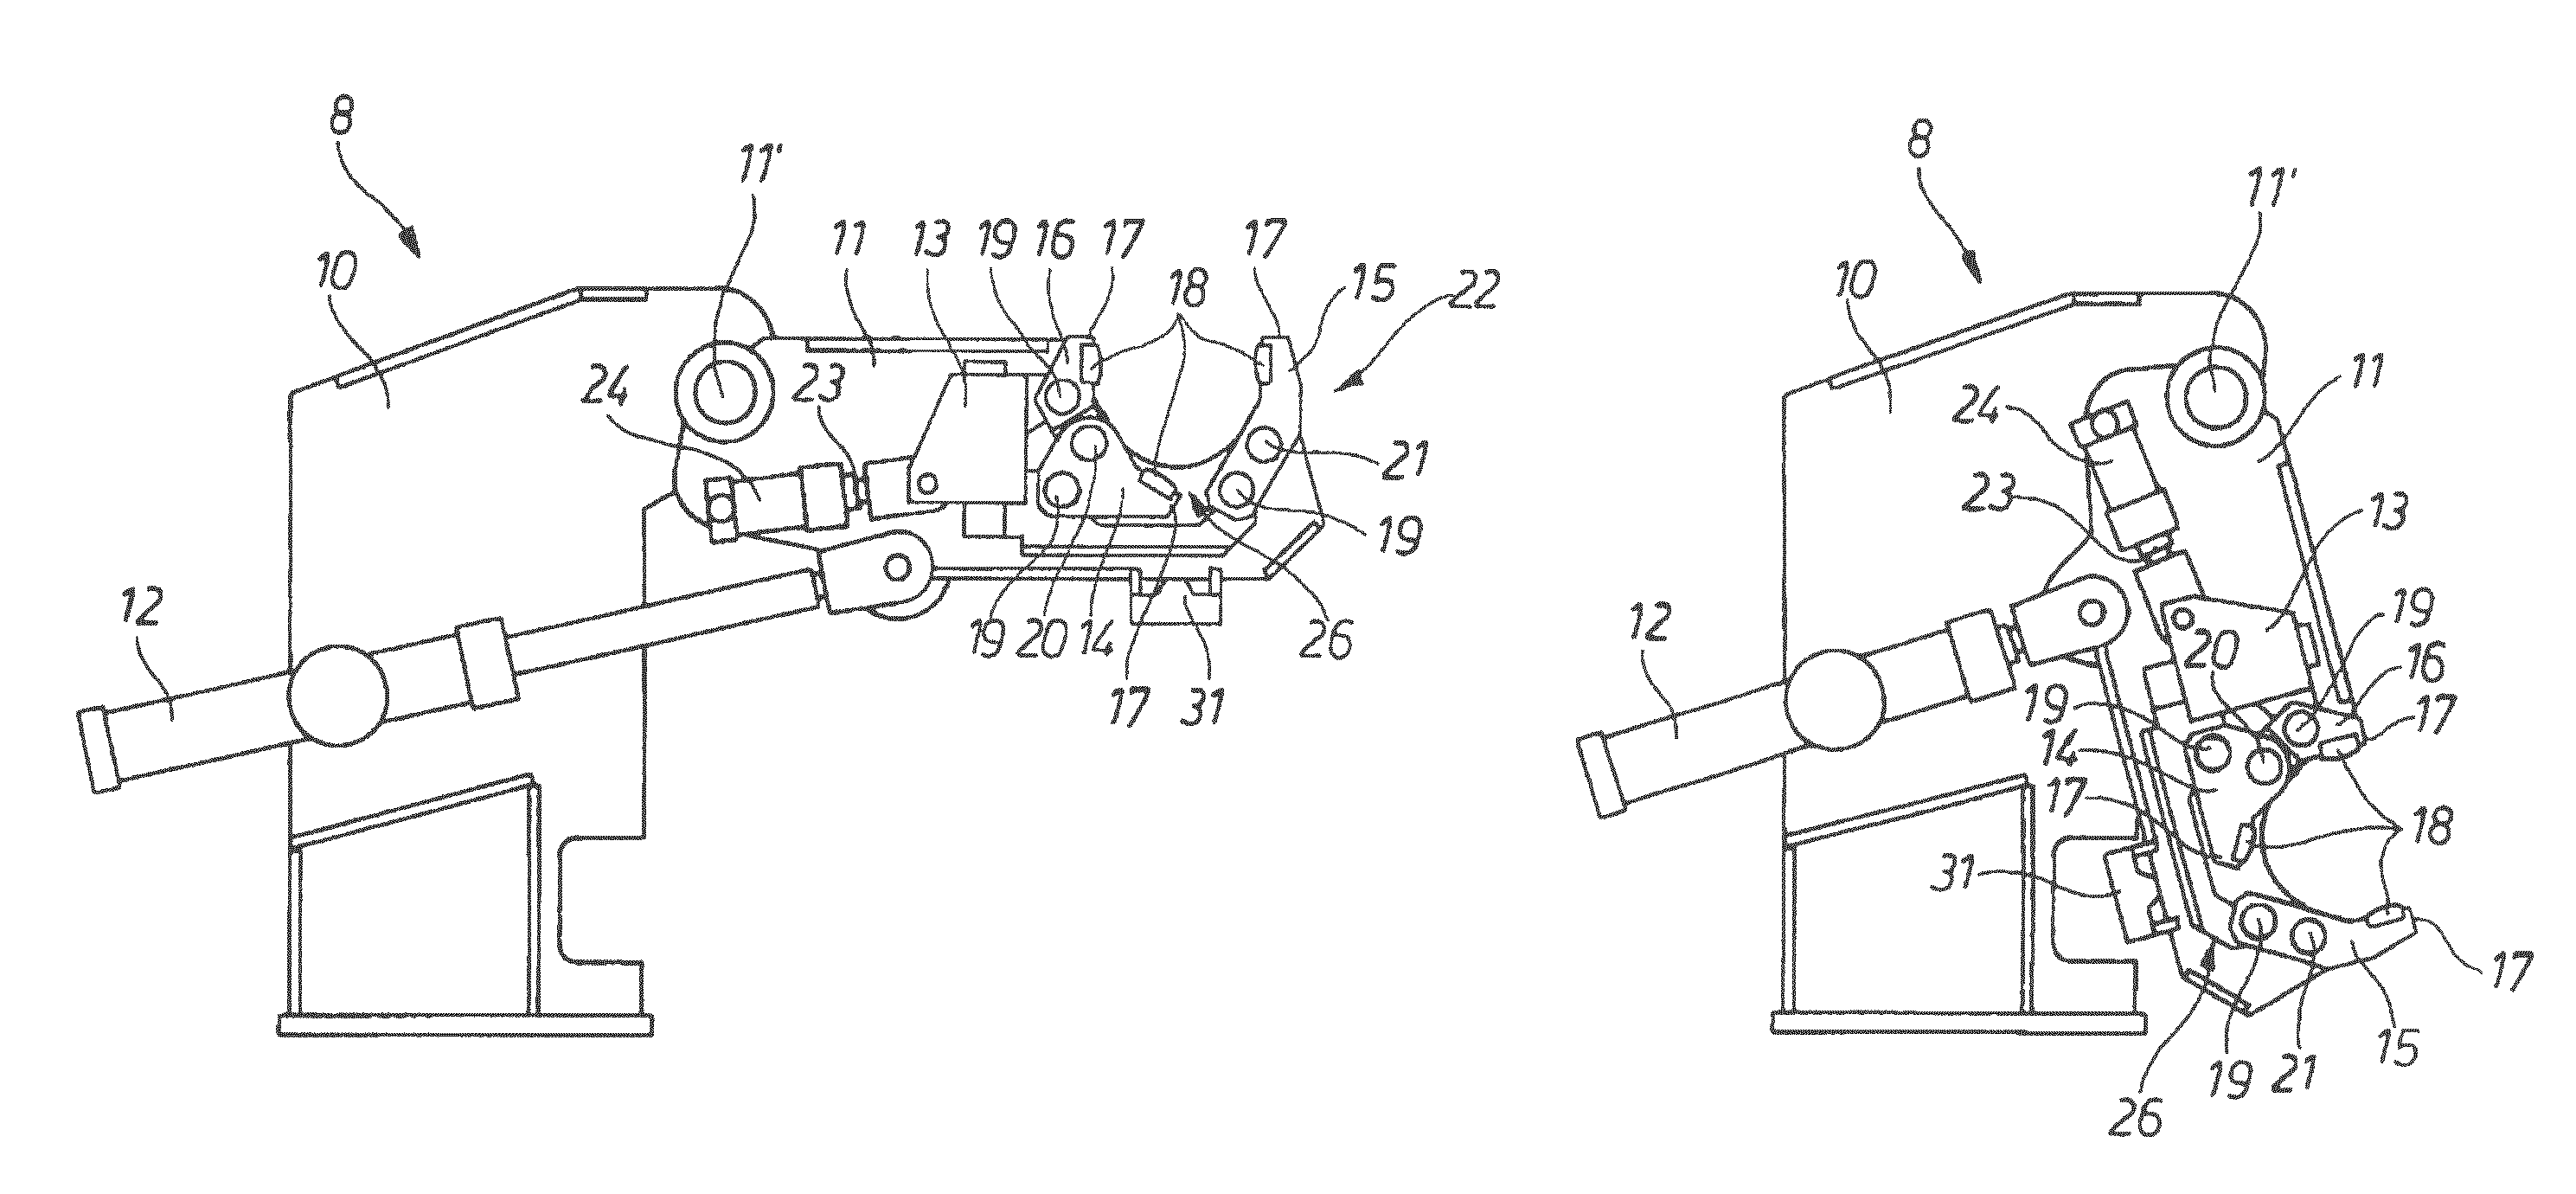 Machine for machining pipe ends, having a centering device for centering a tubular workpiece in relation to an axis of rotation